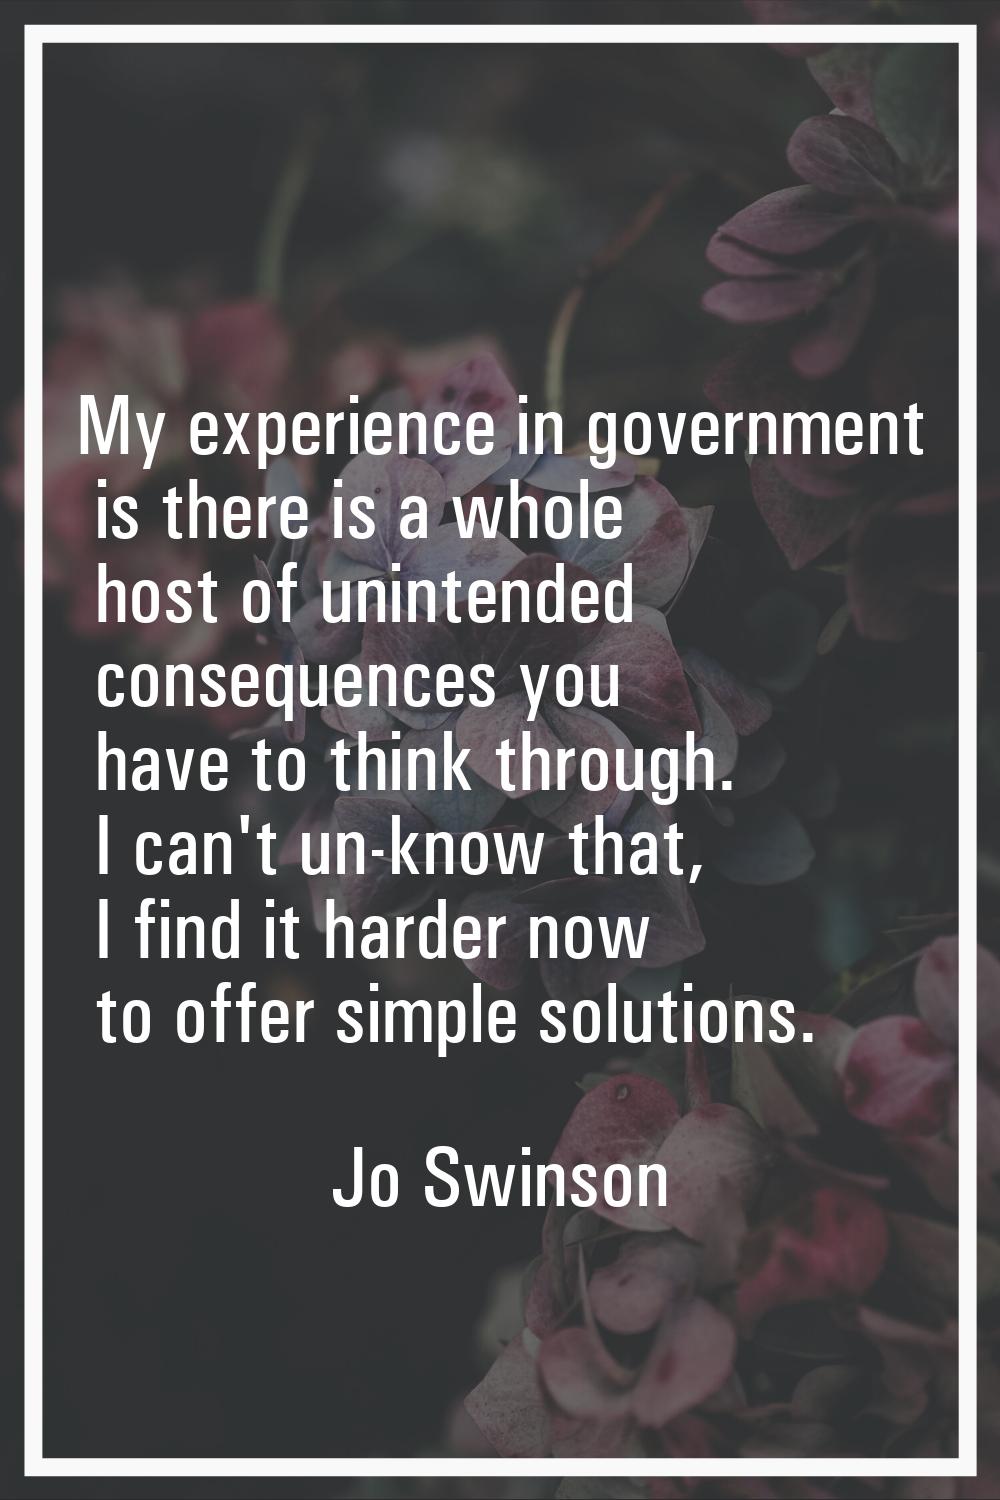 My experience in government is there is a whole host of unintended consequences you have to think t